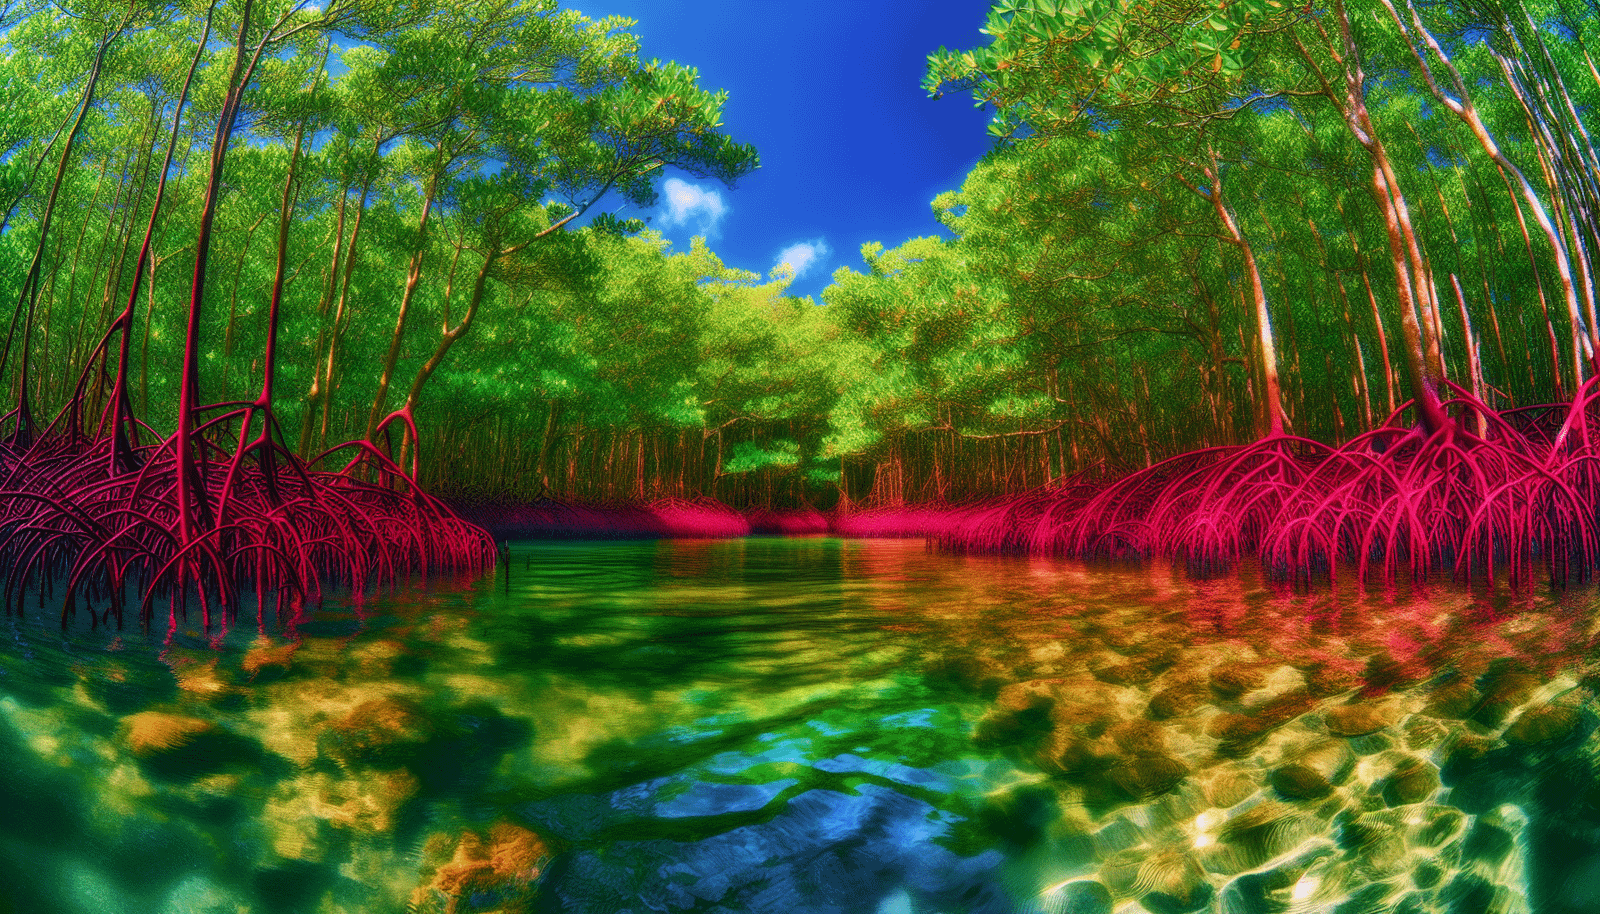 Red mangrove roots in Florida mangroves